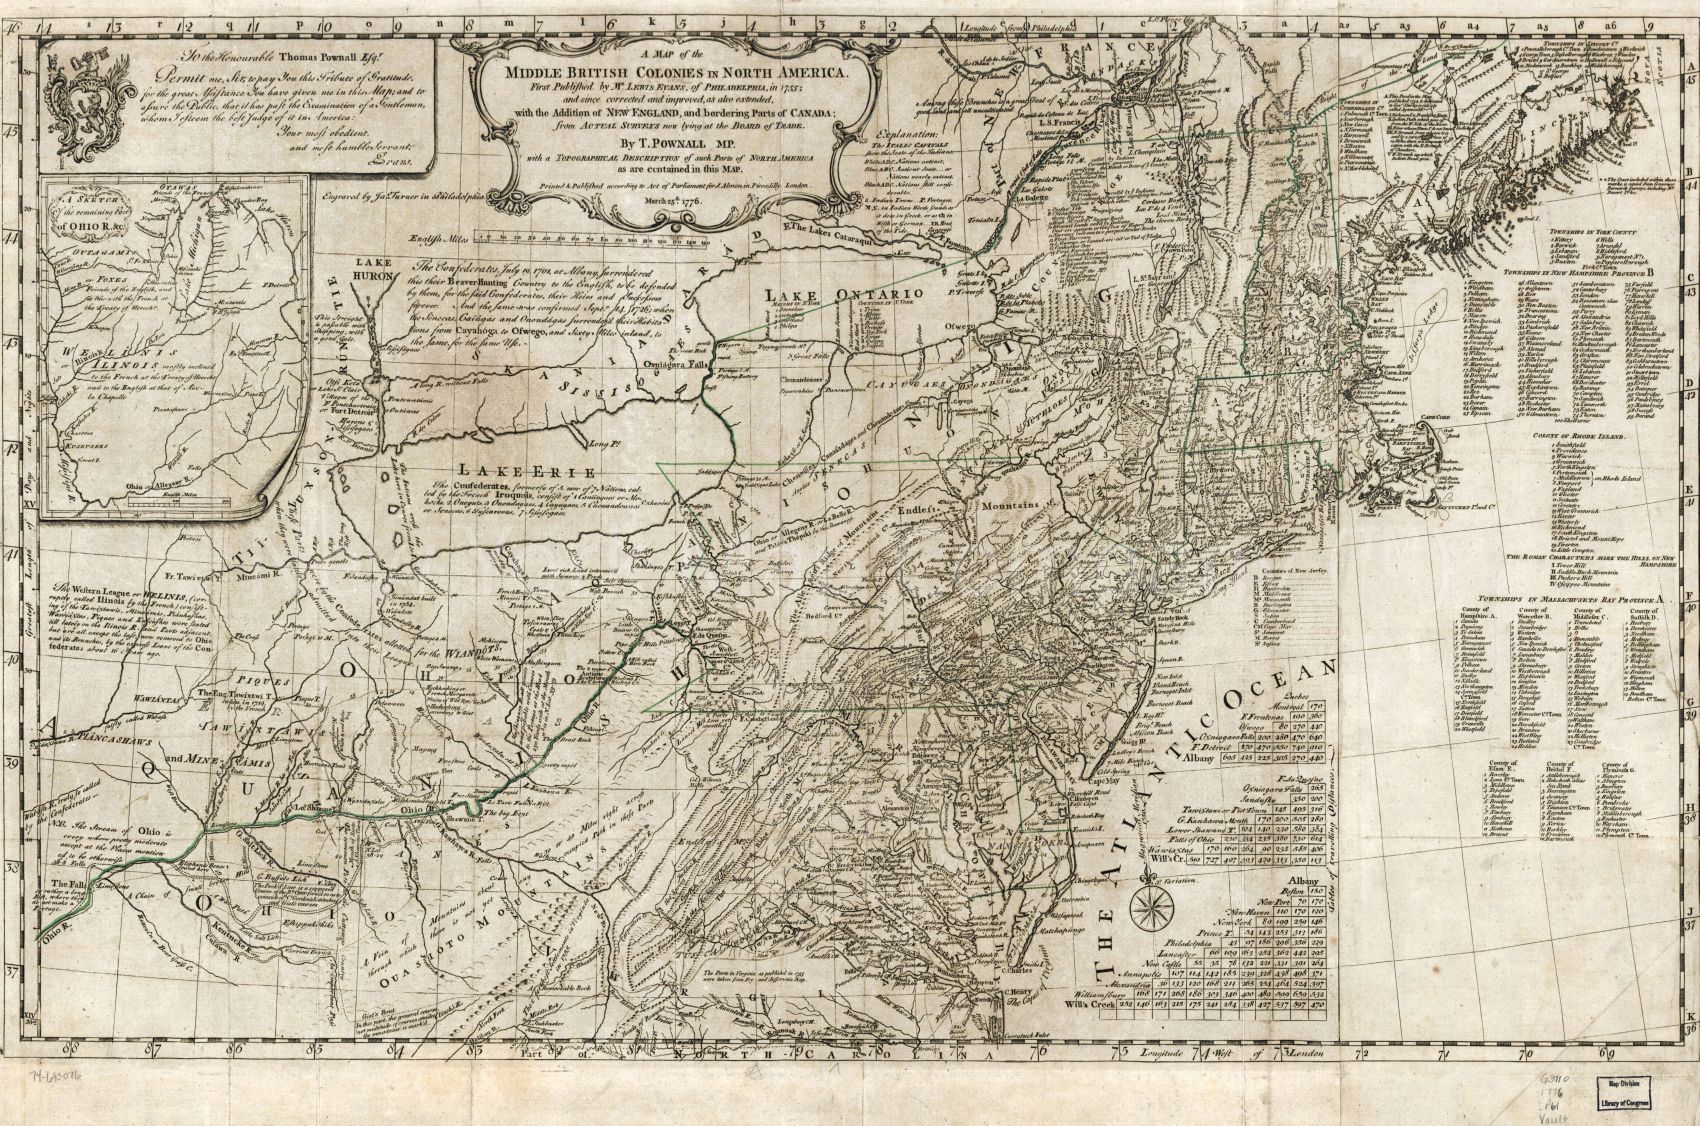 1776 mapVintage map of the middle British colonies in North America. First published by Lewis Evans, of Philadelphia, in 1755; and since corrected and improved, as also extended, with the addition of New England, and bordering parts of Canada; from actua